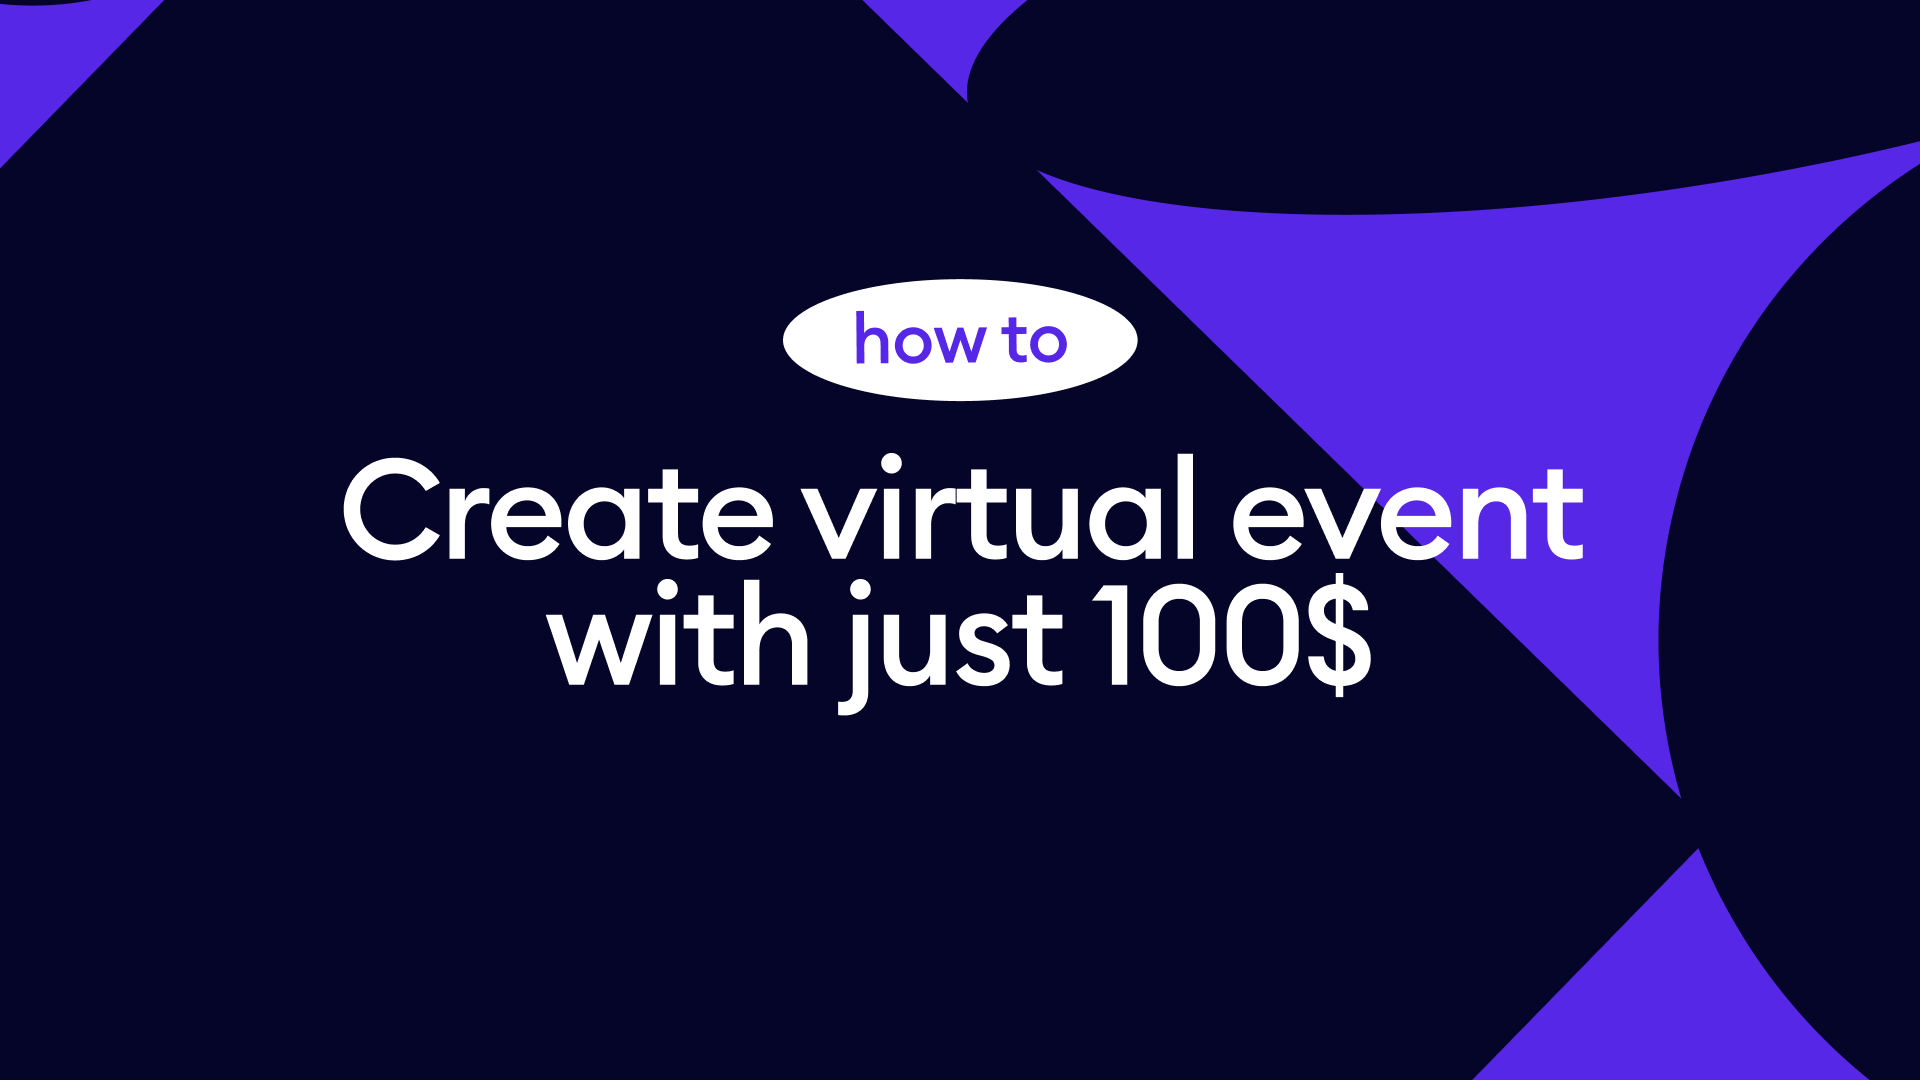 Virtual Event Budget: You can go with just $100 using SpatialChat